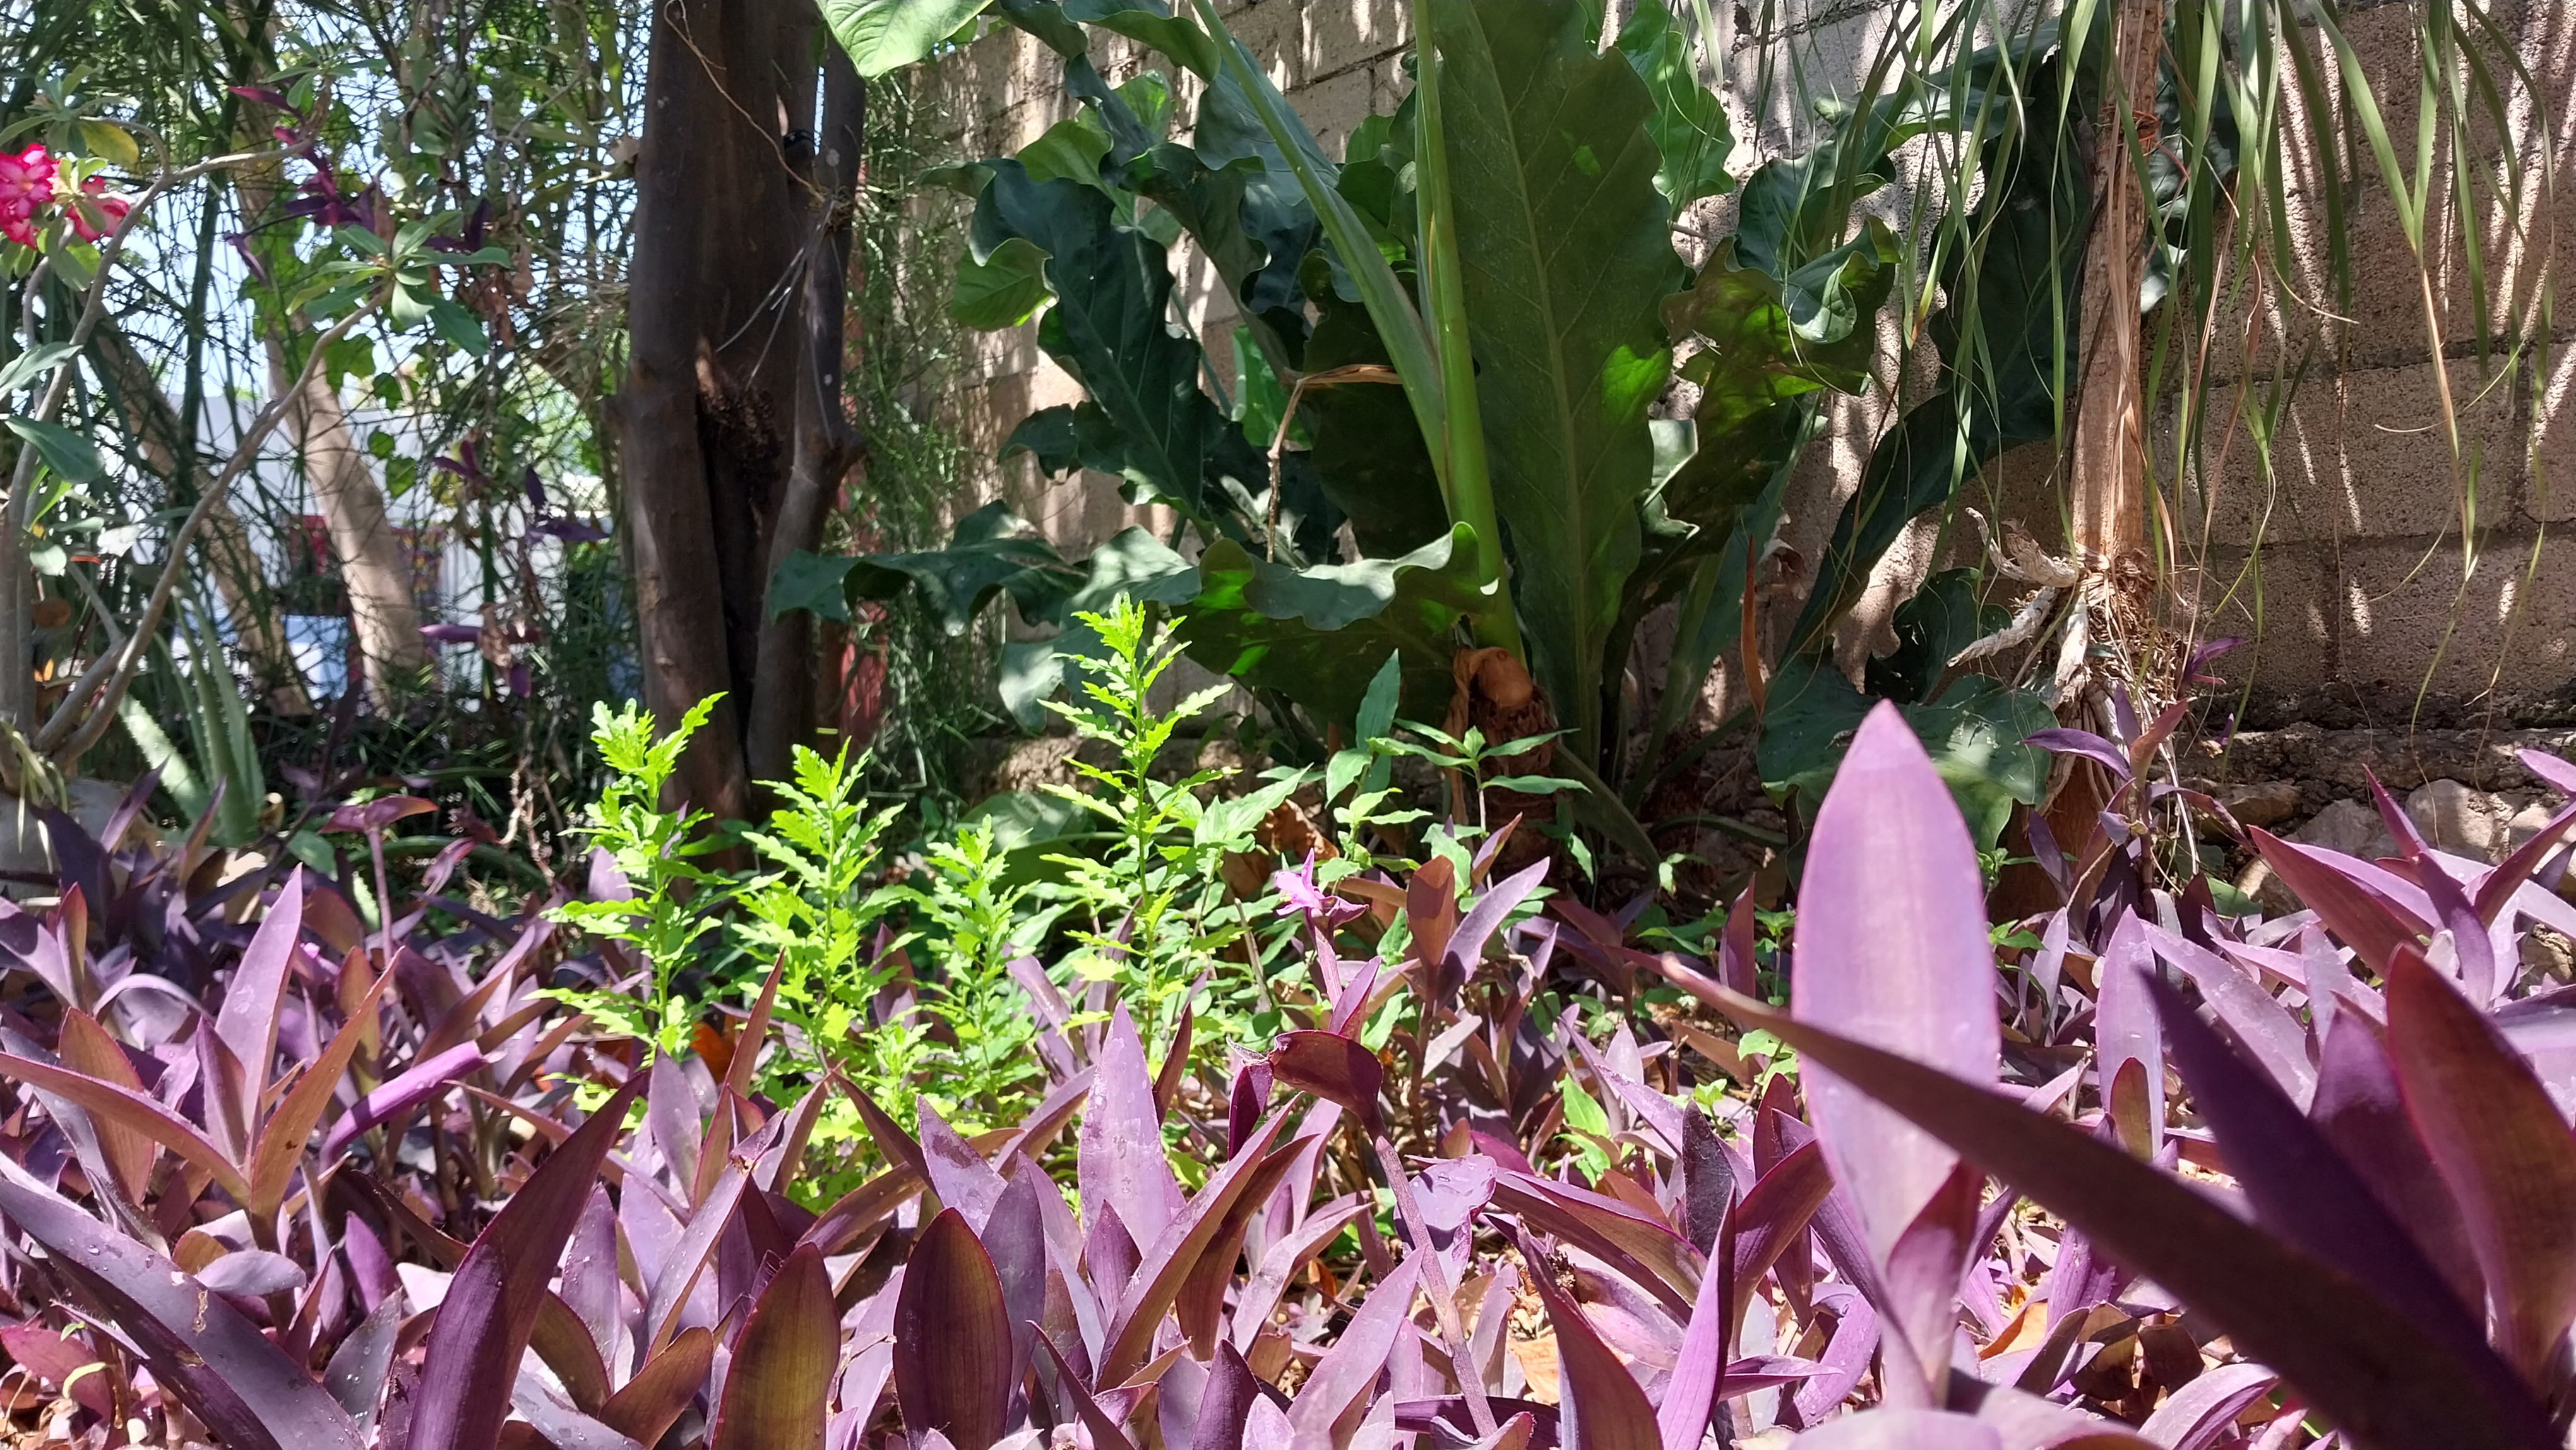 Close up photo of purple and green plants